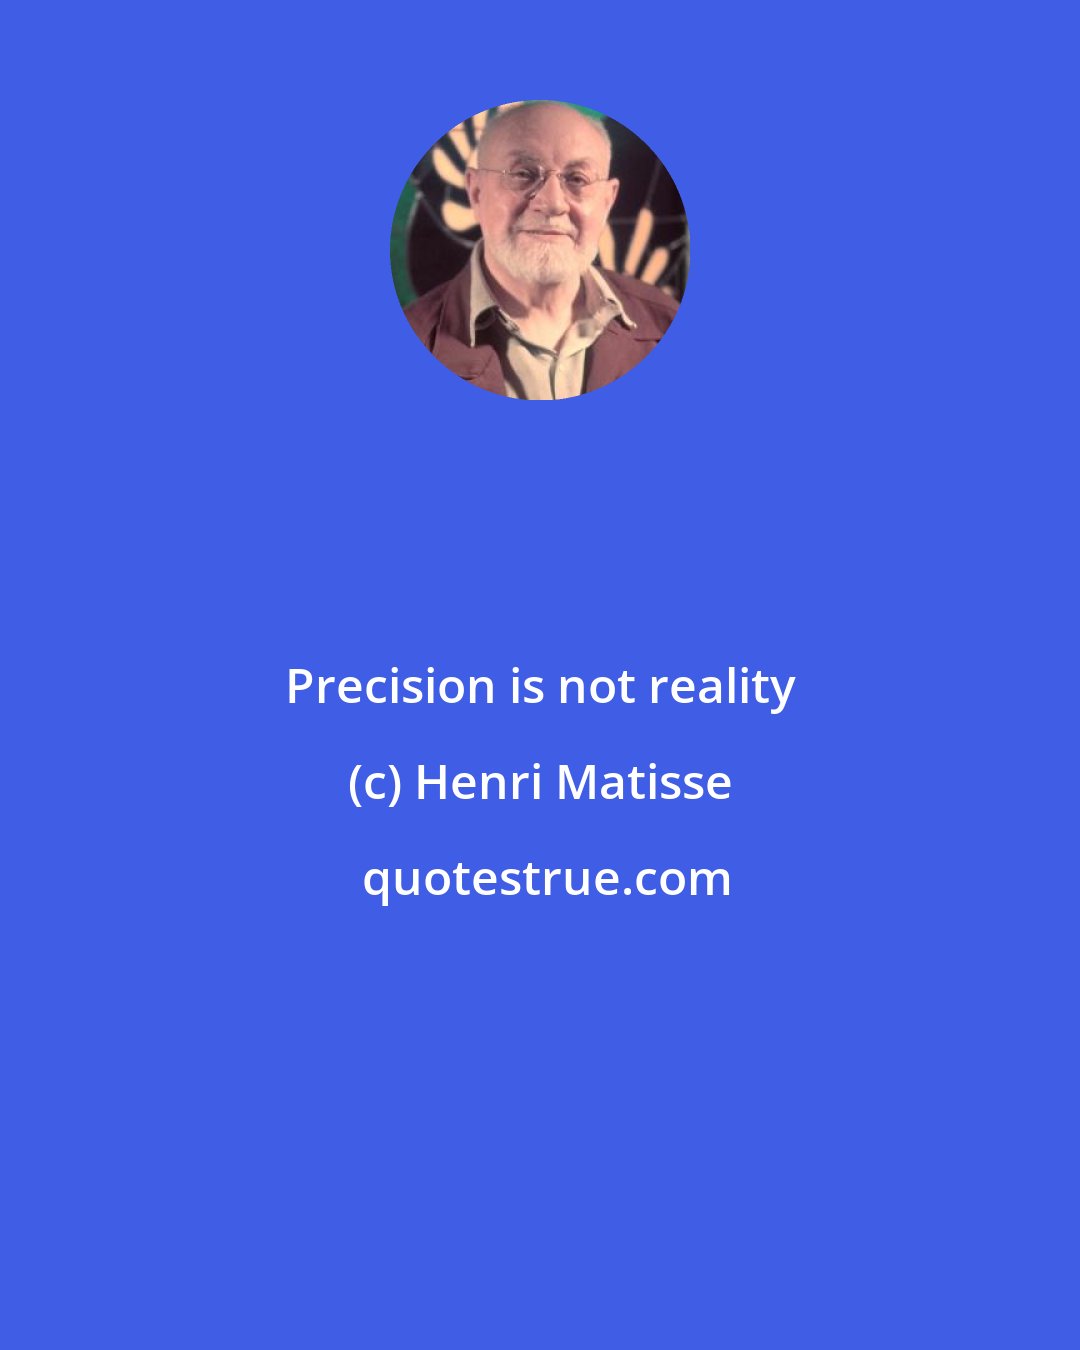 Henri Matisse: Precision is not reality